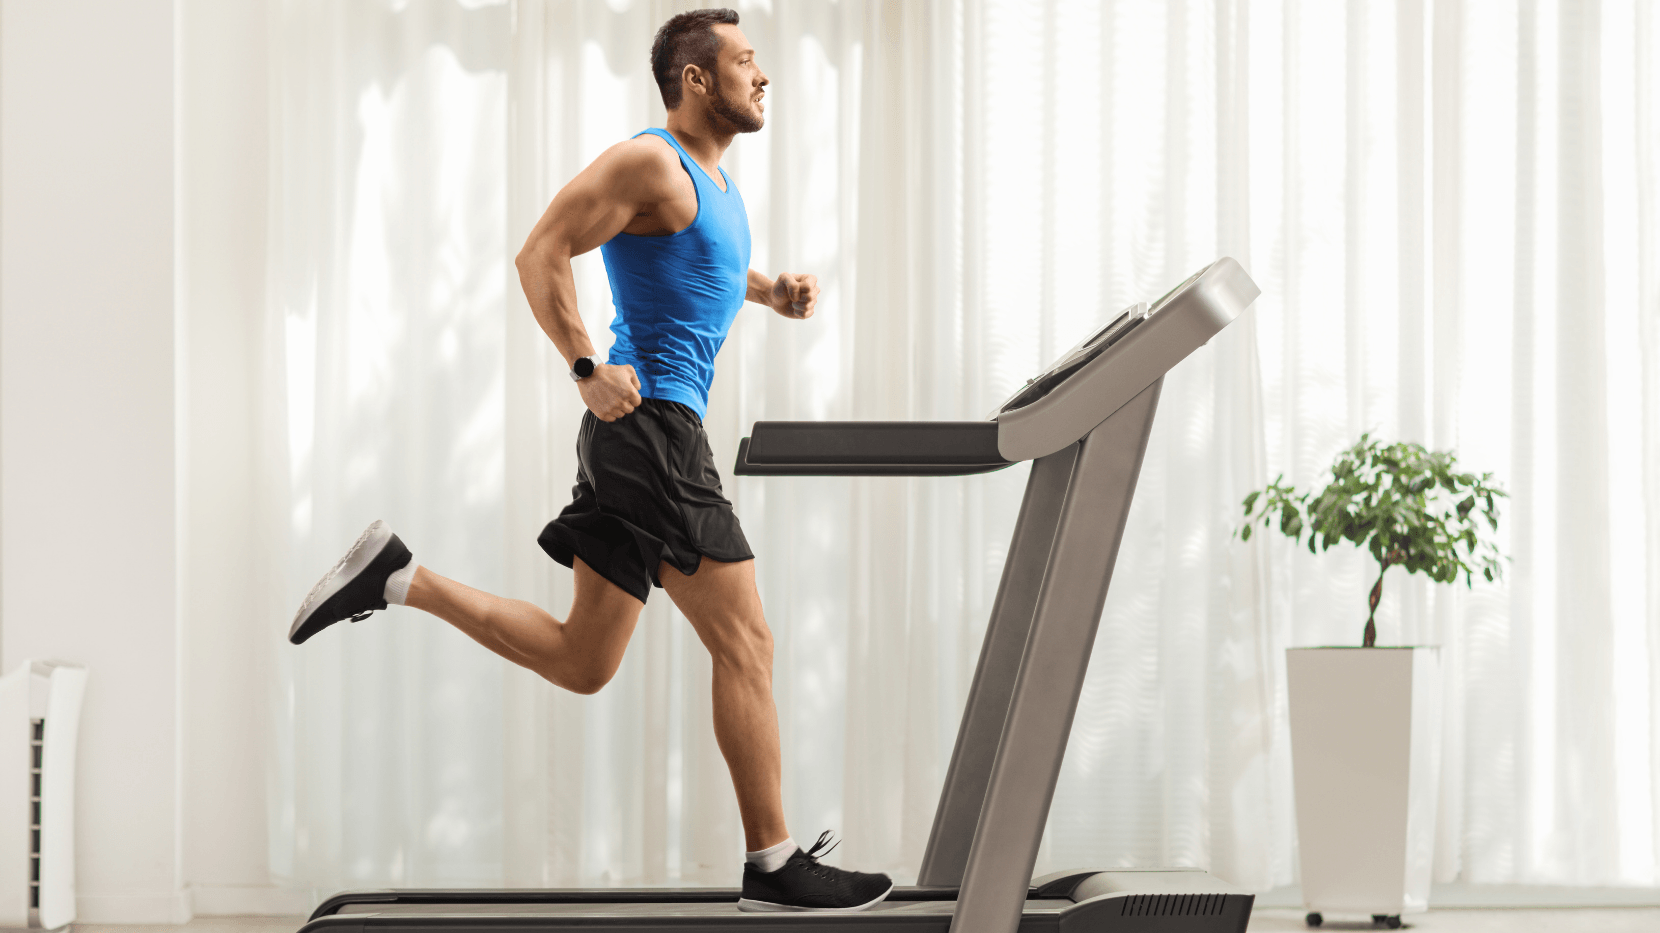 A Man Exercising at Home by Running on a Treadmill